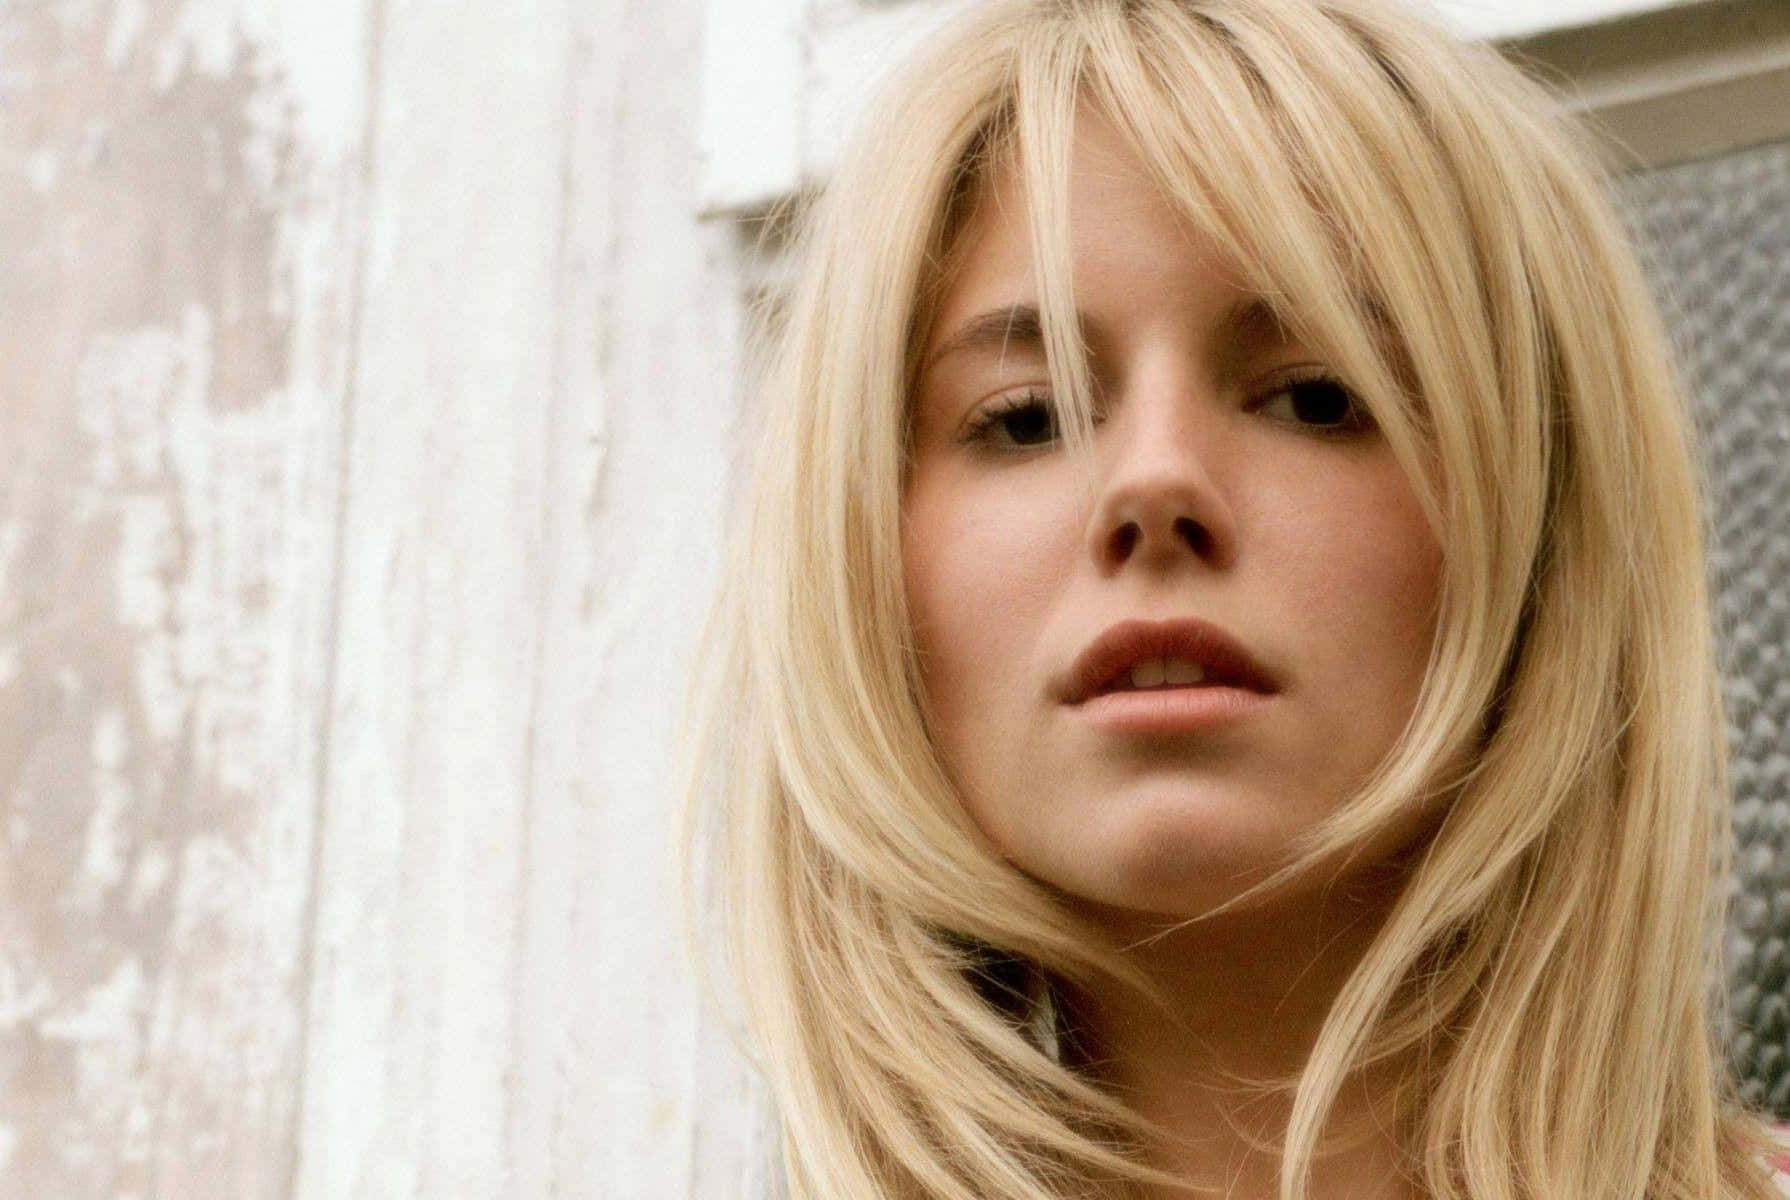 Sienna Miller Fierce Looking Down Candid Photography Pictures Wallpaper